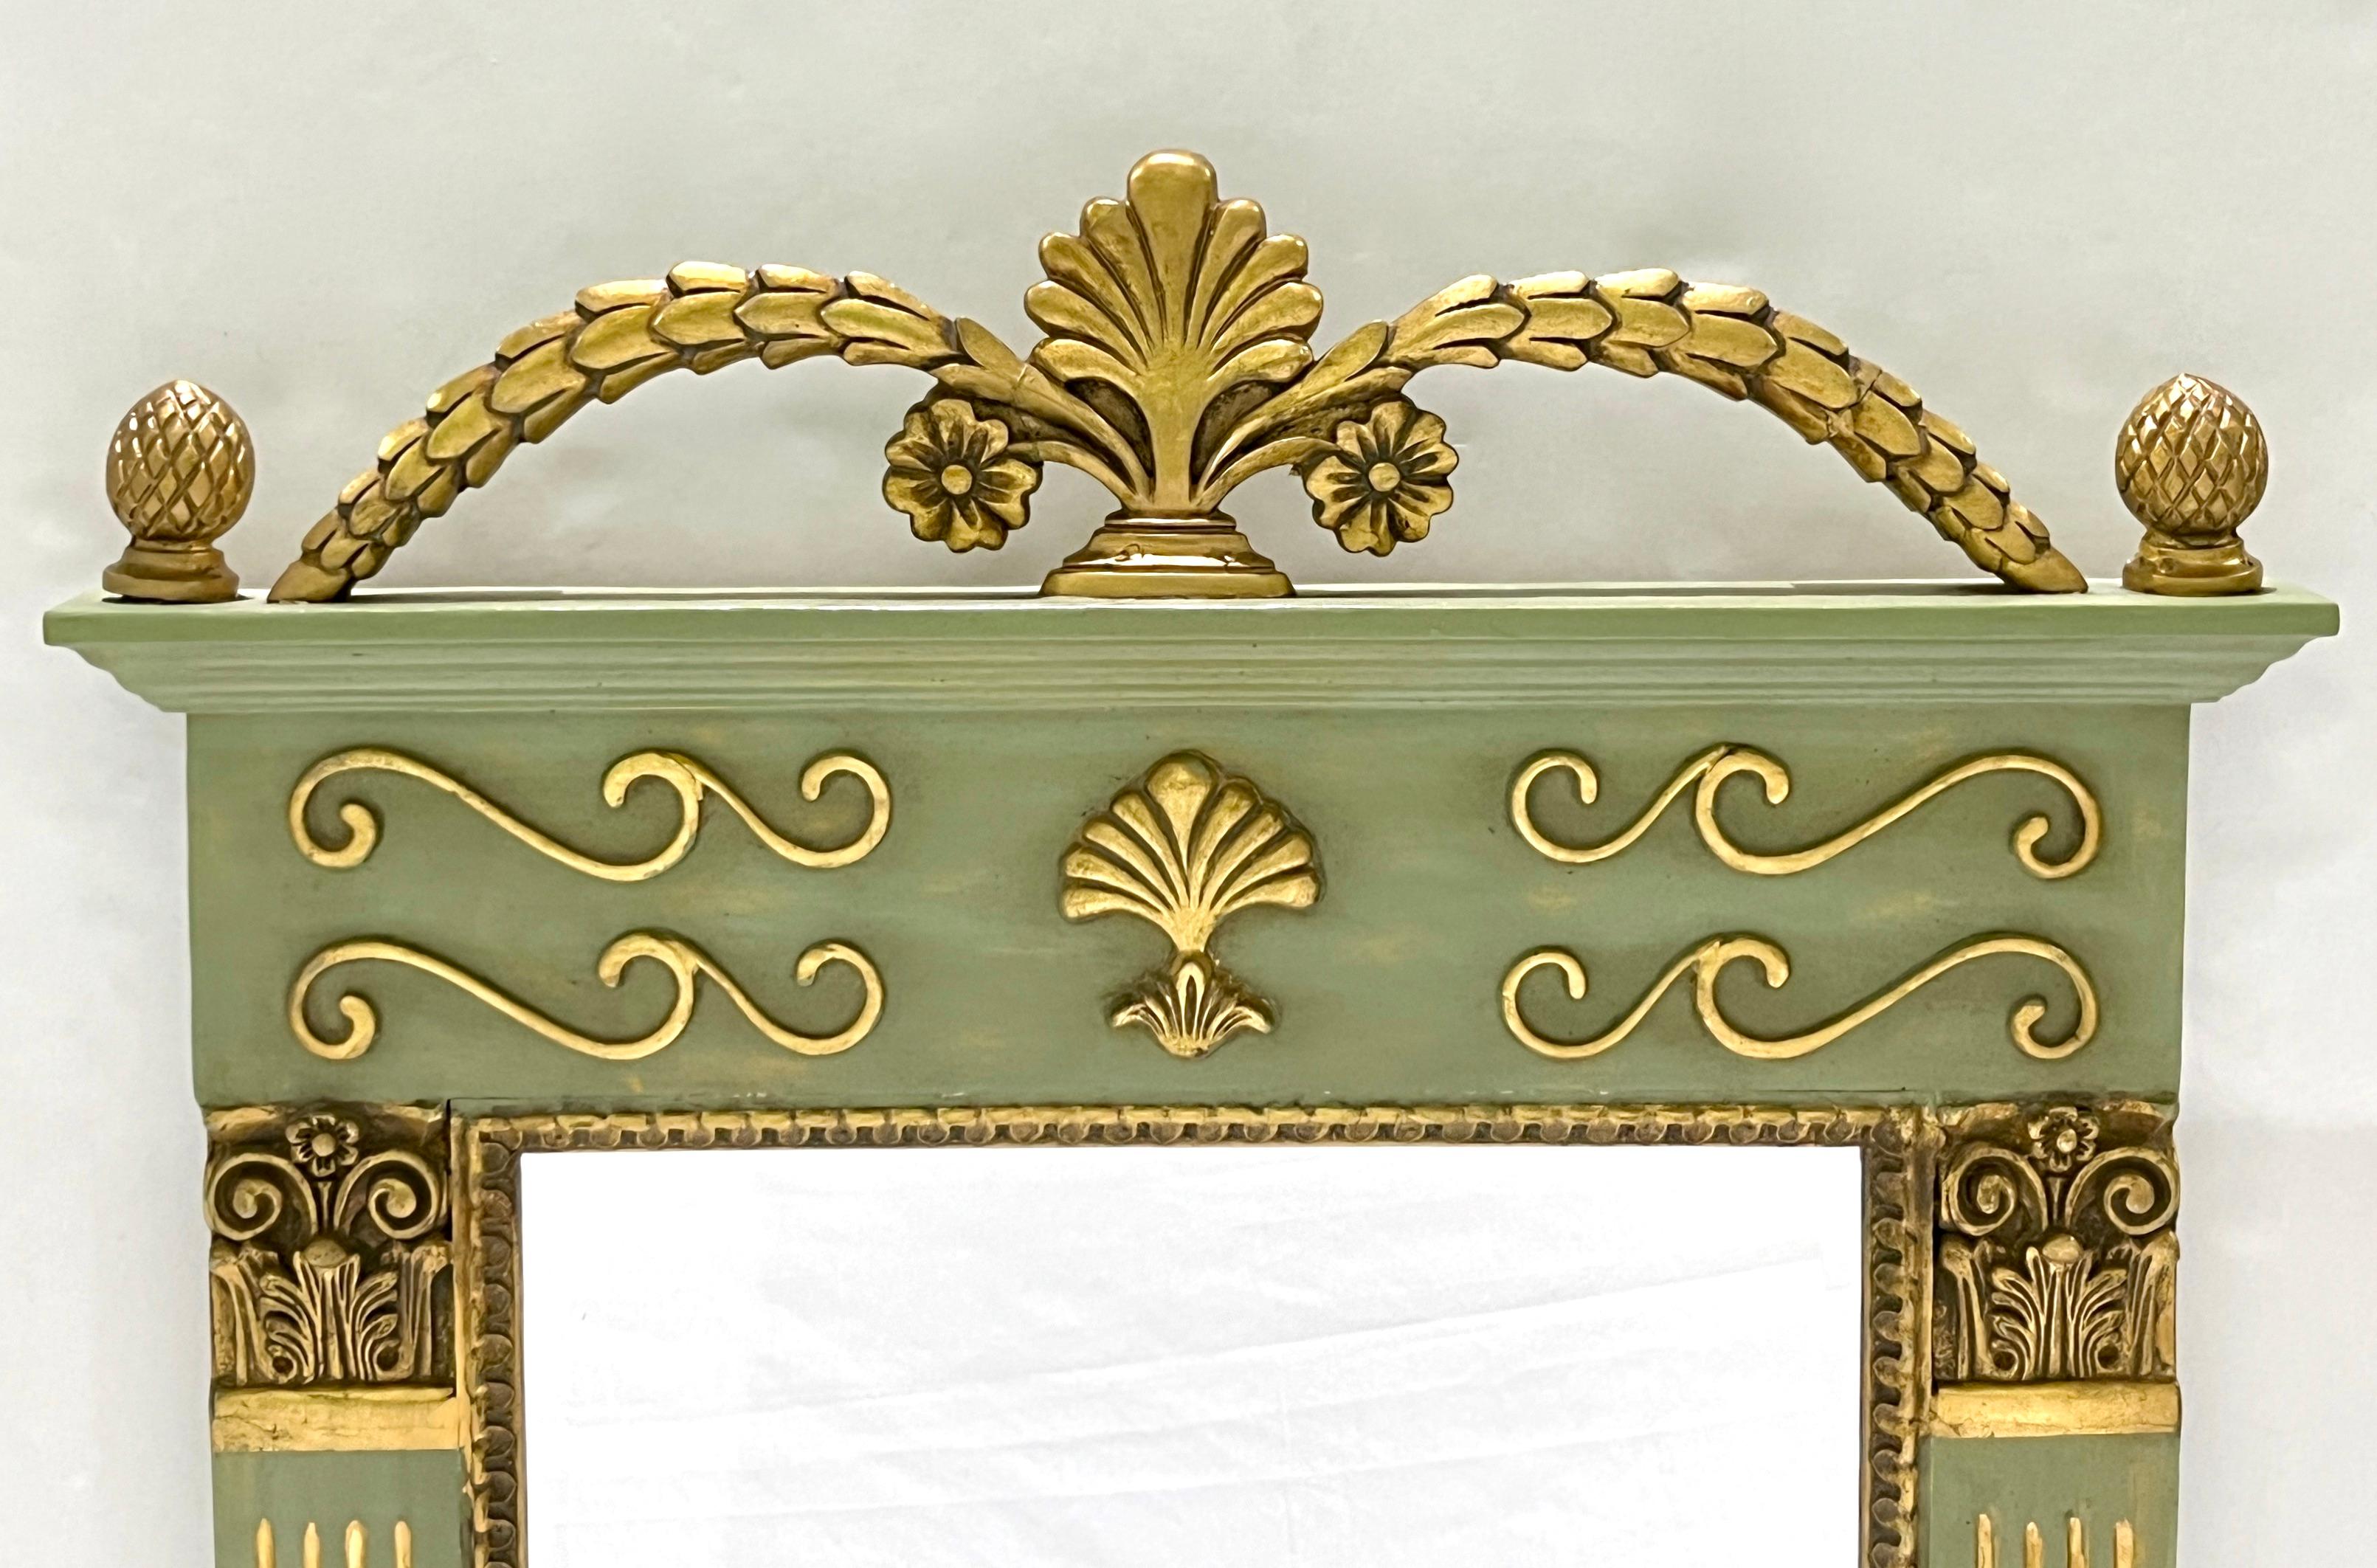 A mid-20th century modern French decorative painted wood trumeau mirror, in an Empire revival design, decorated in a Napoleon apple moss green painted color, with extensive gold accents and decorative carvings: fluted sides, a nicely beveled mirror